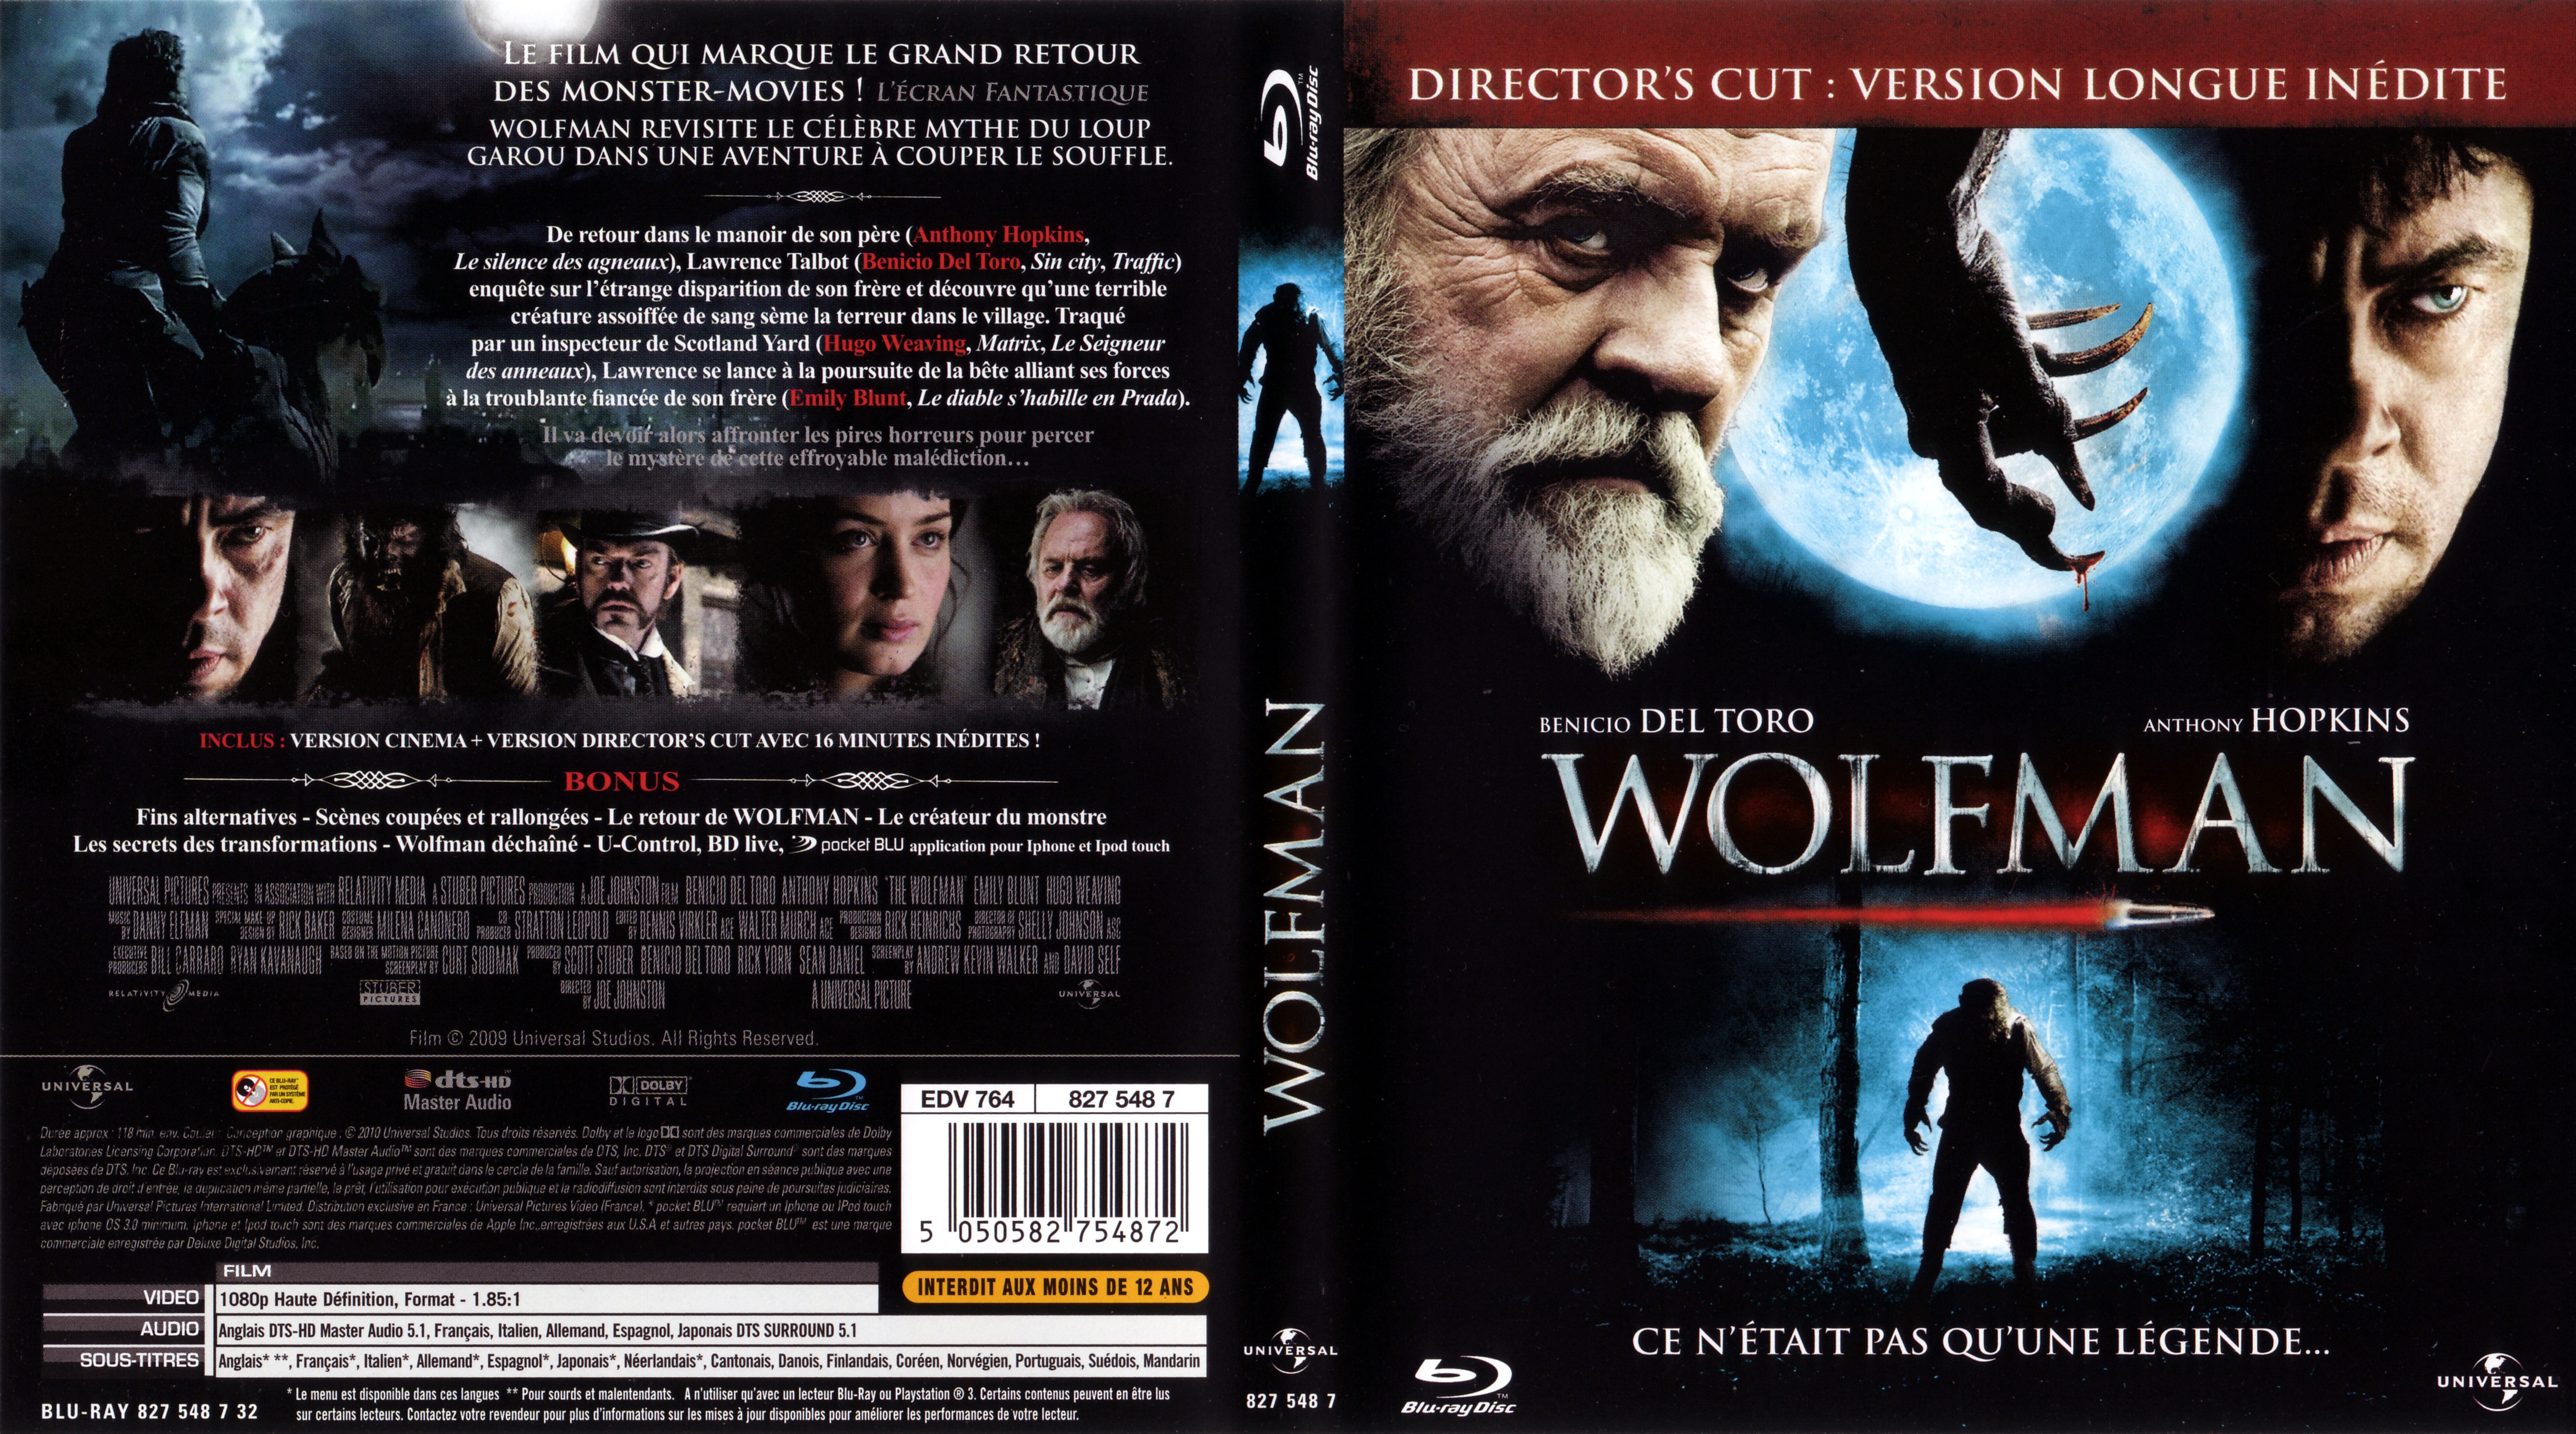 Jaquette DVD Wolfman (BLU-RAY)